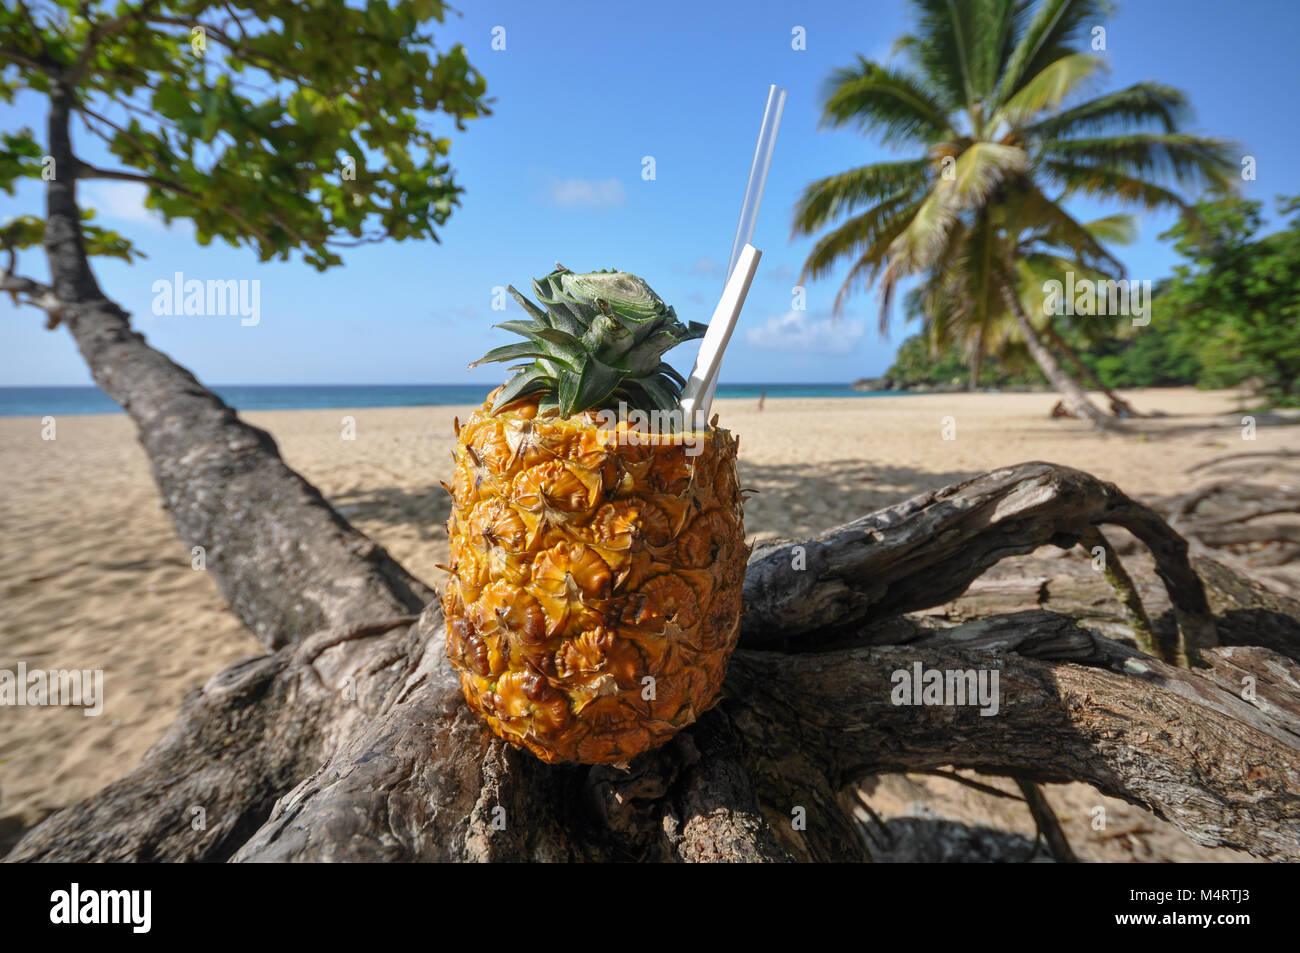 Pina Colada served in fresh pineapple perched on palm tree at Cabrera Beach in Cabrera, Dominican Republic. Stock Photo